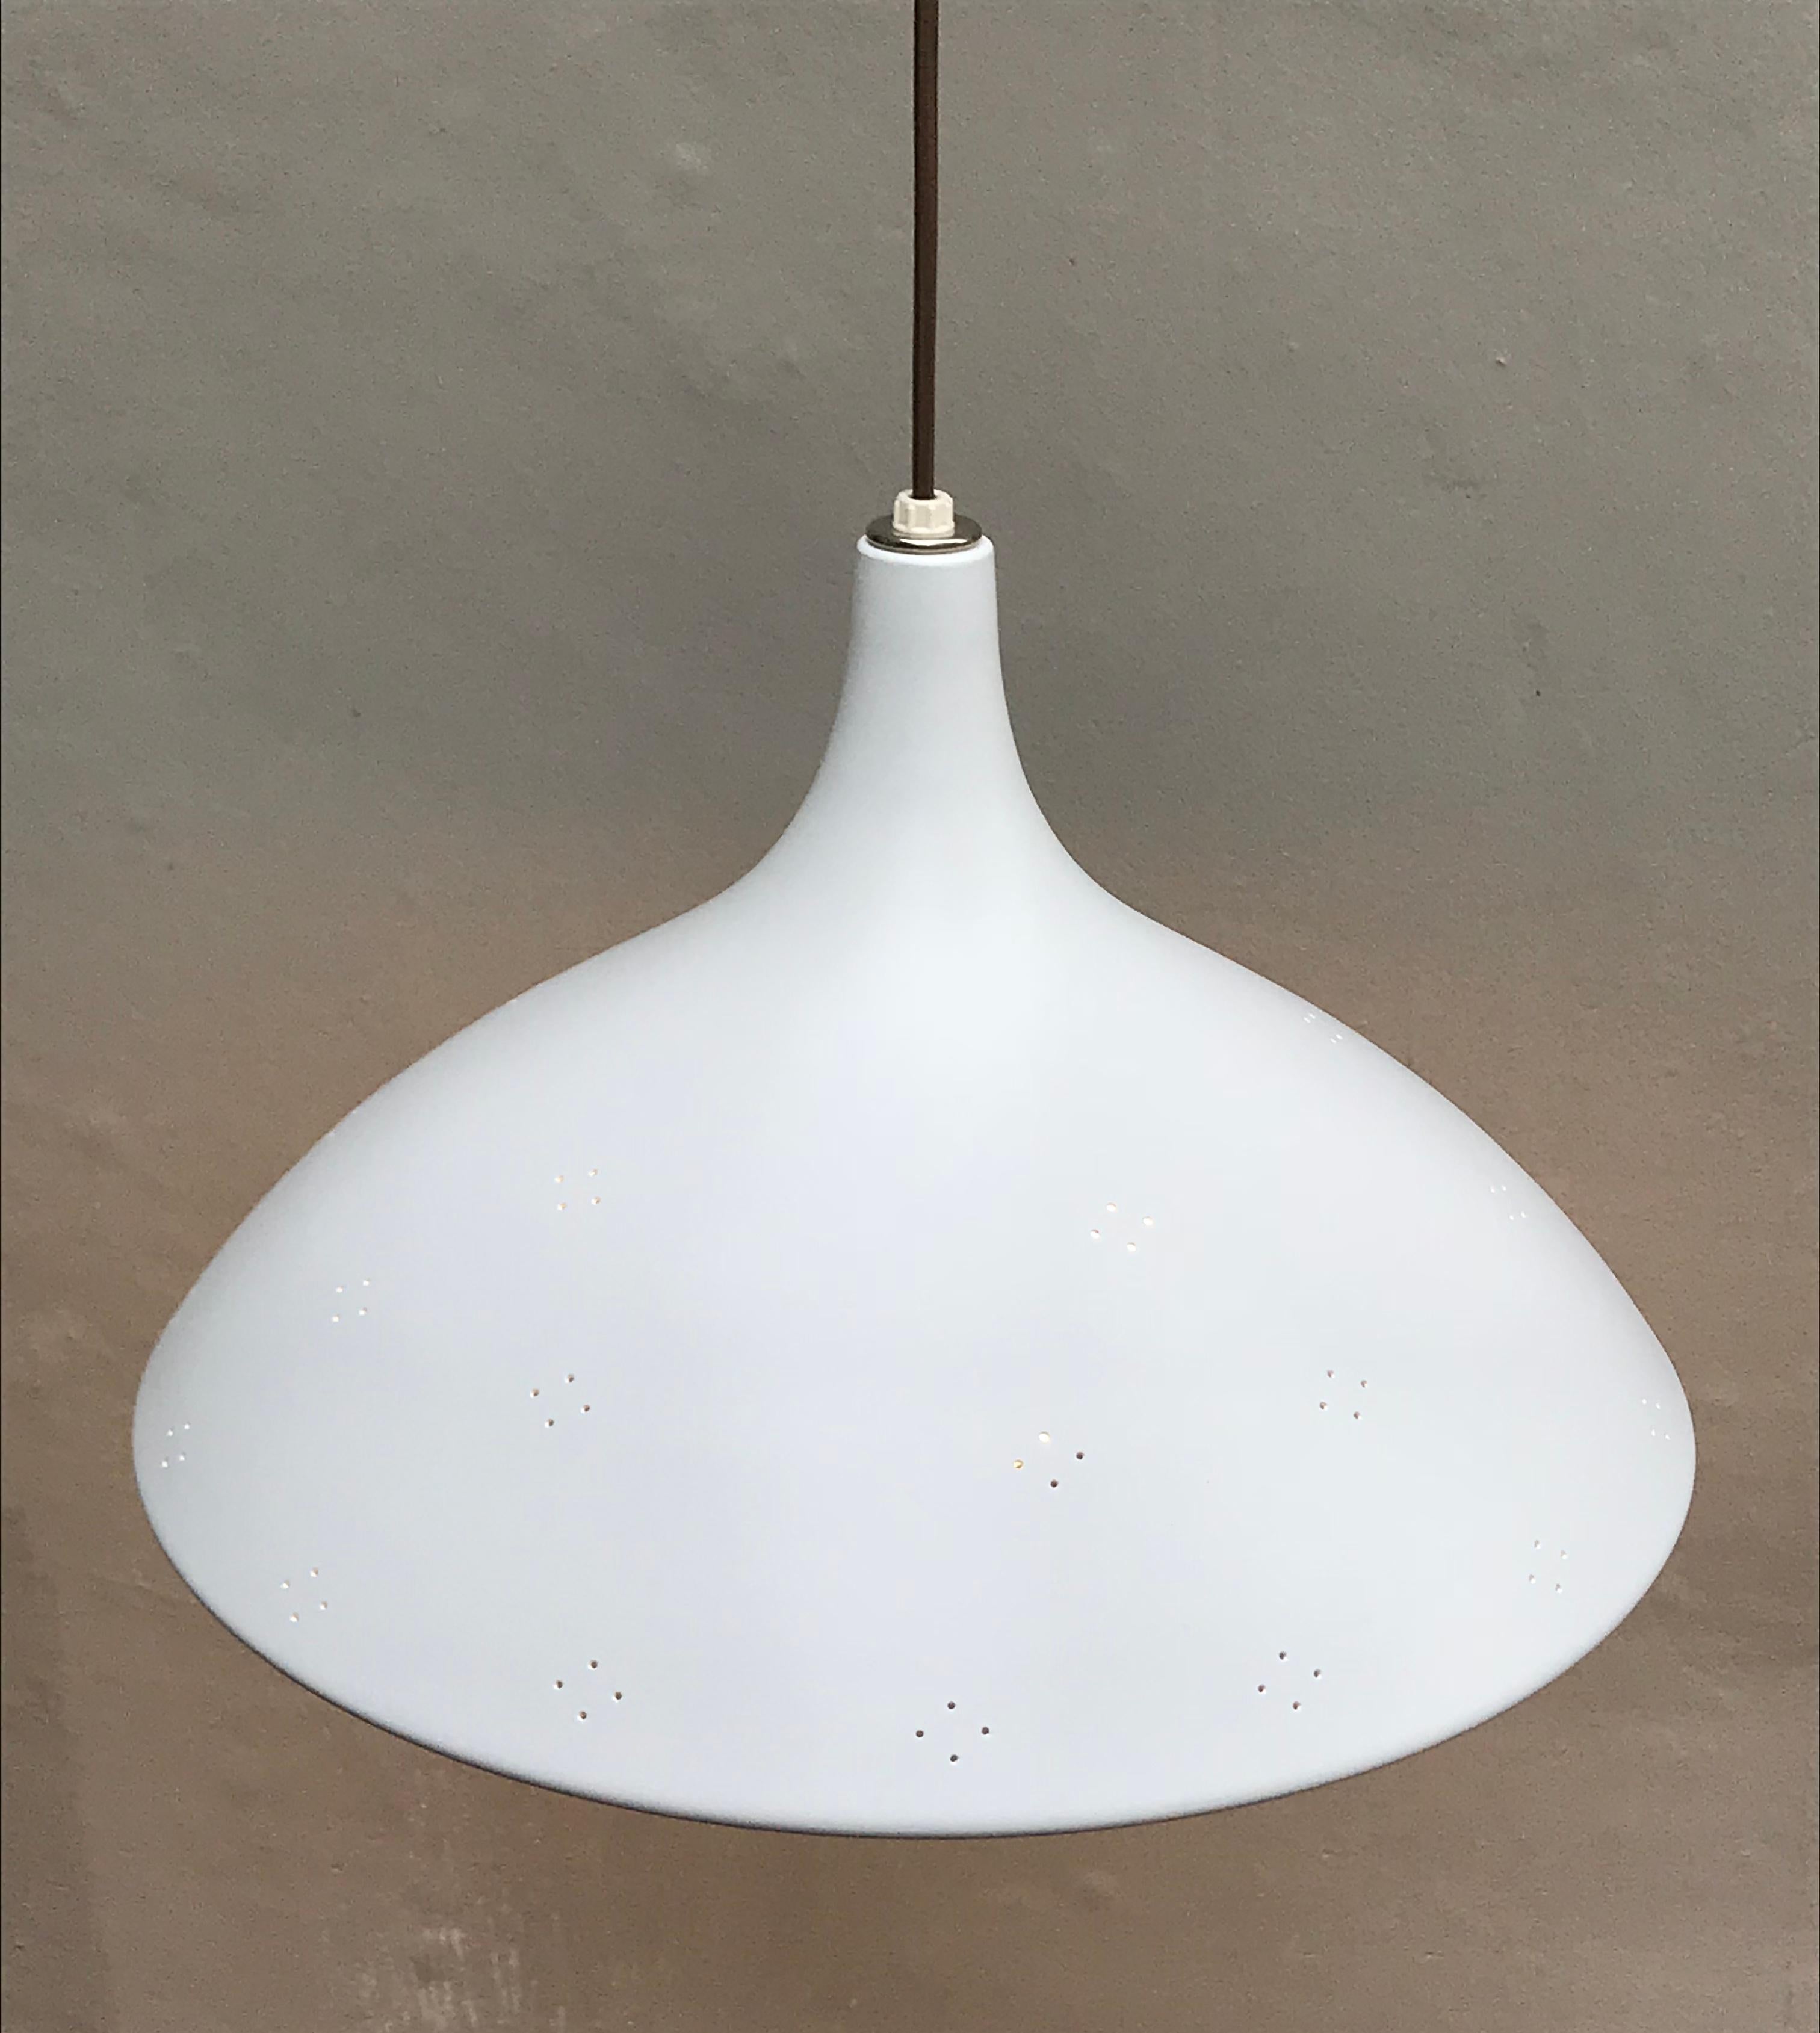 Beautiful Mid-Century Modern round aluminium pendant light with a matte white sprayed finish. Takes one 60 to 100 watt bulb. Photographed with 5 inch diameter bulb that slightly shows at the bottom of fixture. Bulb not included.